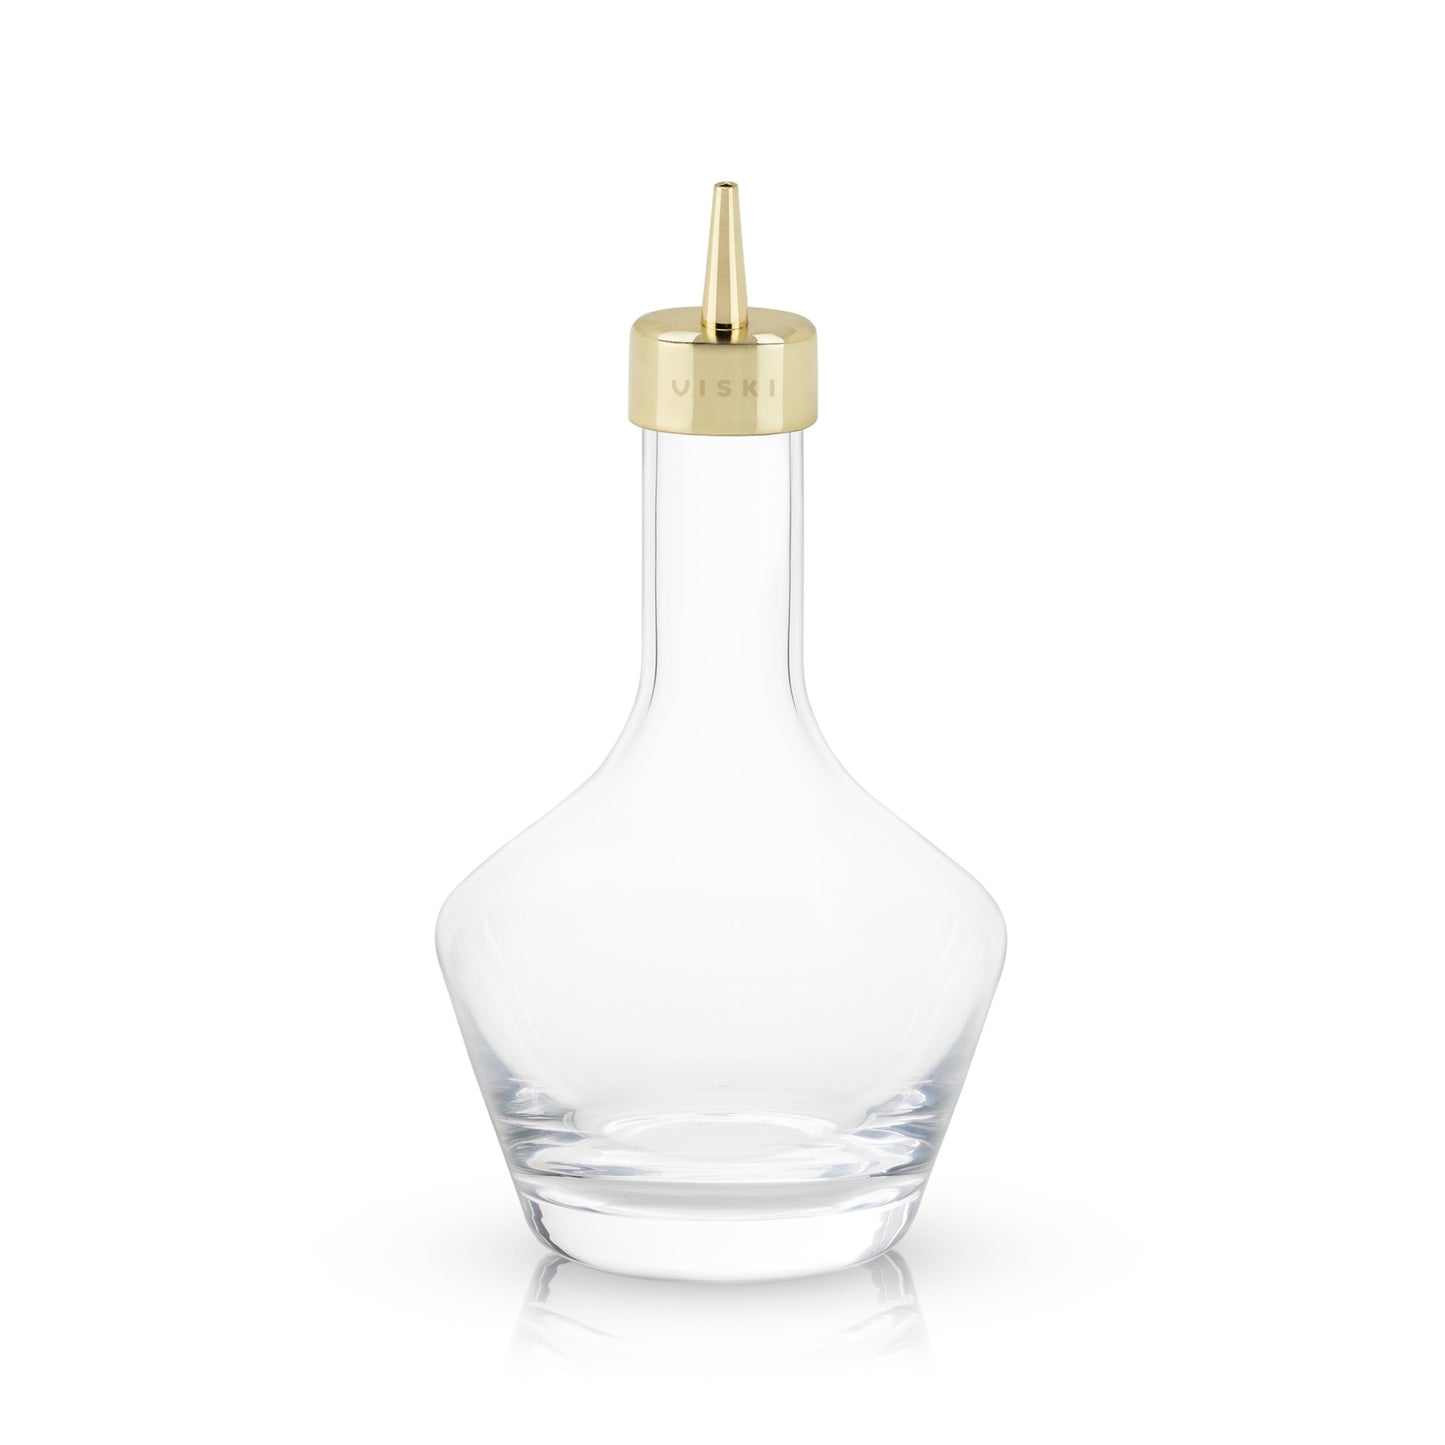 Bitters Bottle with Gold Dasher Top by Viski®